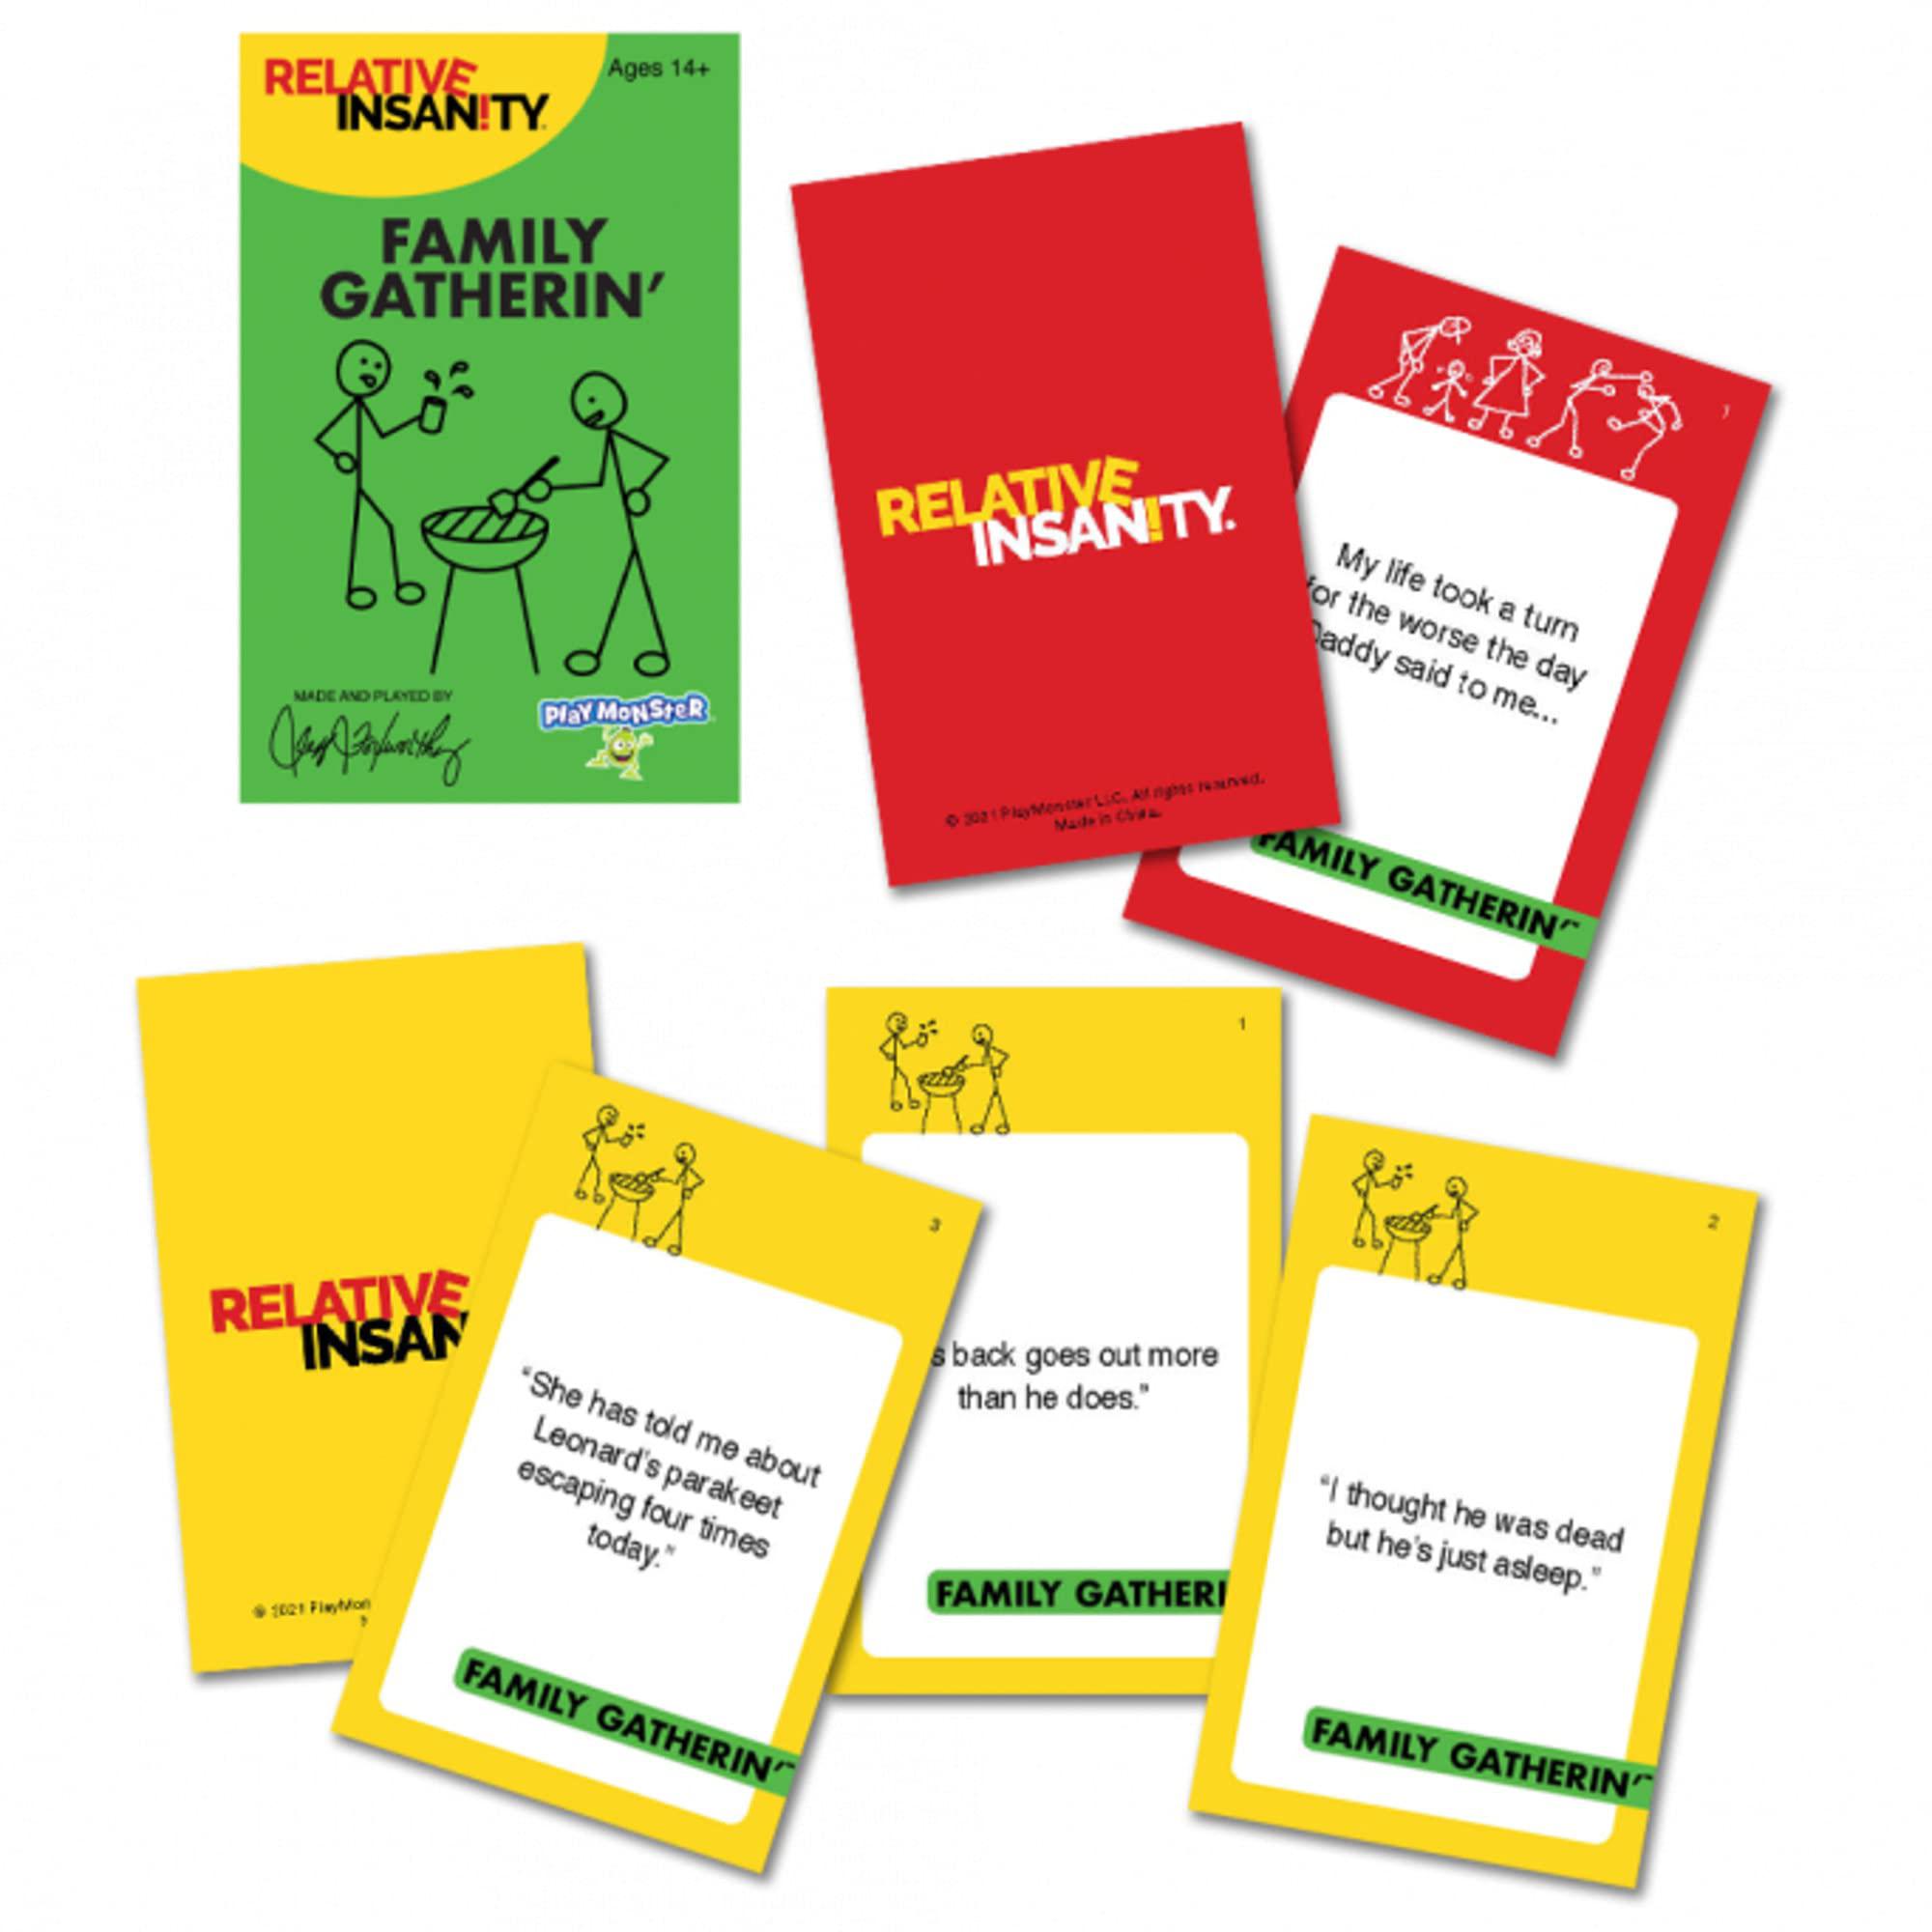 PlayMonster relative insanity - family gatherin' - laugh-out-loud party game all about family - ages 14+